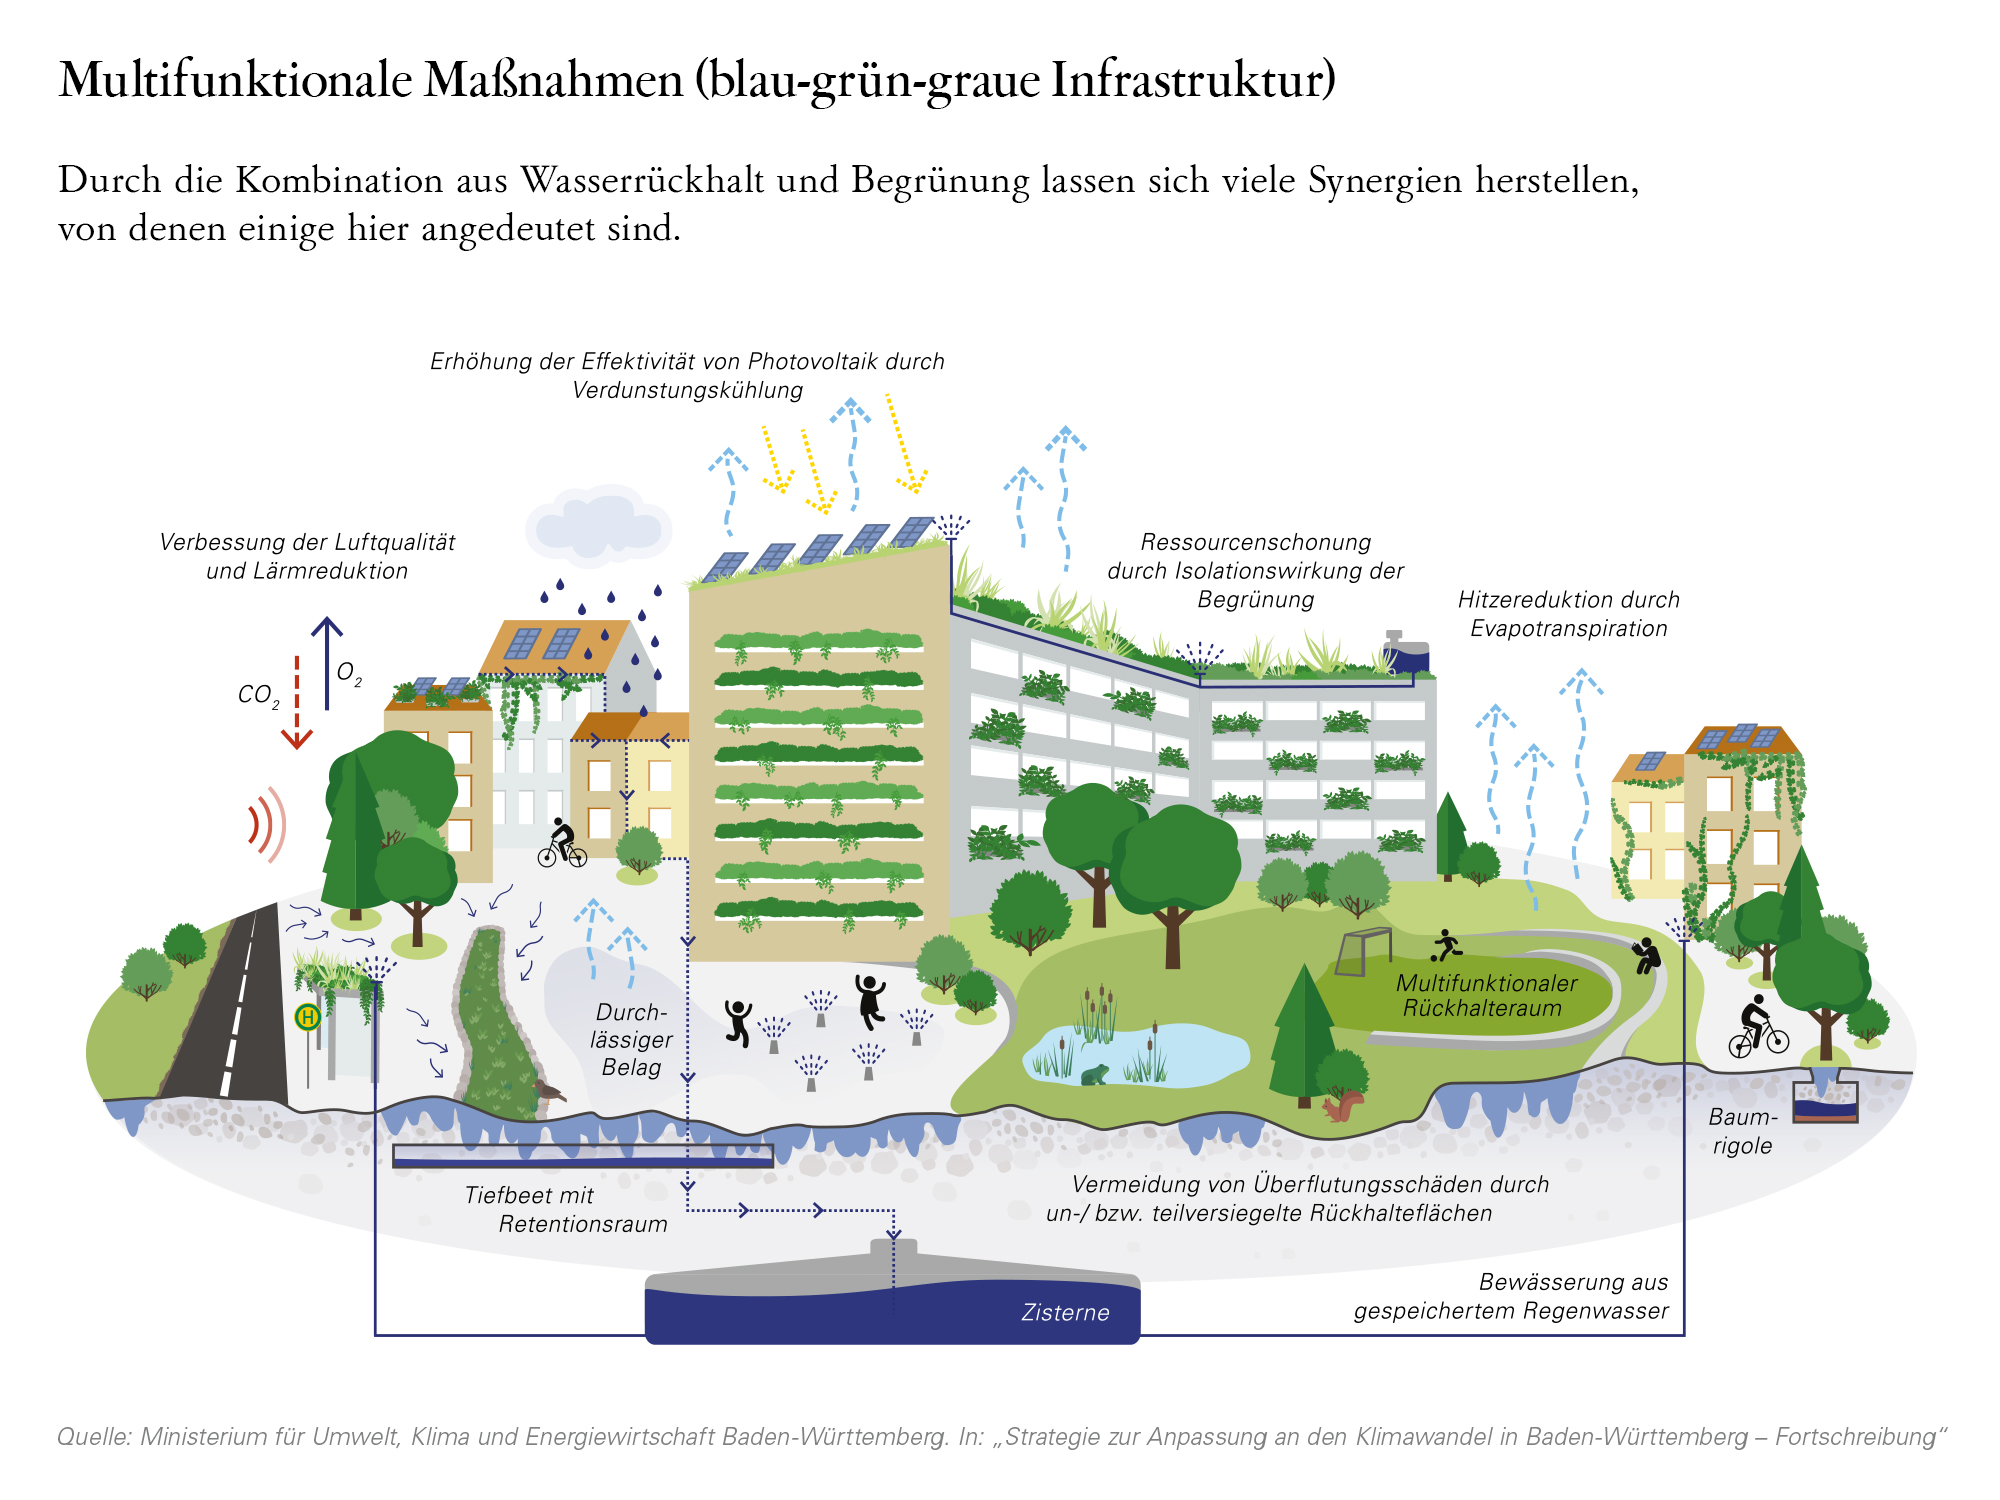 Illustration of multifunctional measures for urban infrastructure that combine water retention and greening. It shows green roofs, green facades, photovoltaic systems, permeable pavements, deep beds with retention space, multifunctional retention areas and a cistern for rainwater utilization. Benefits include improved air quality, noise reduction, heat reduction and resource conservation. Source: Baden-Württemberg Ministry of the Environment.